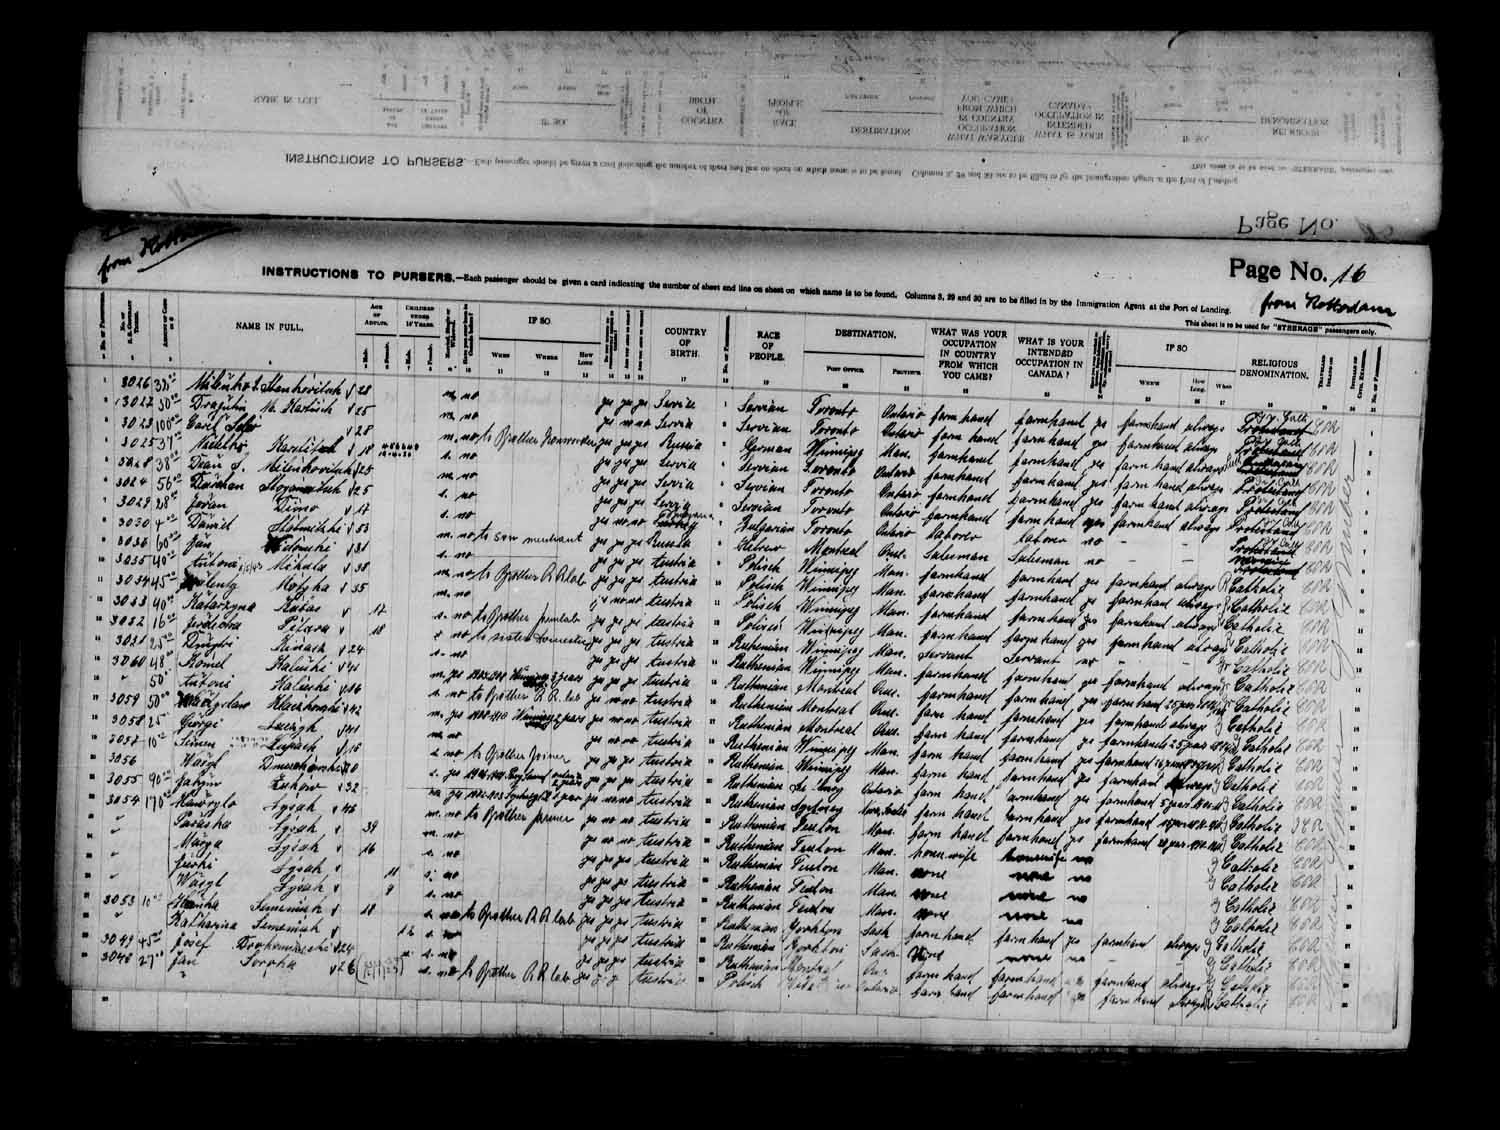 Digitized page of Passenger Lists for Image No.: e003575103